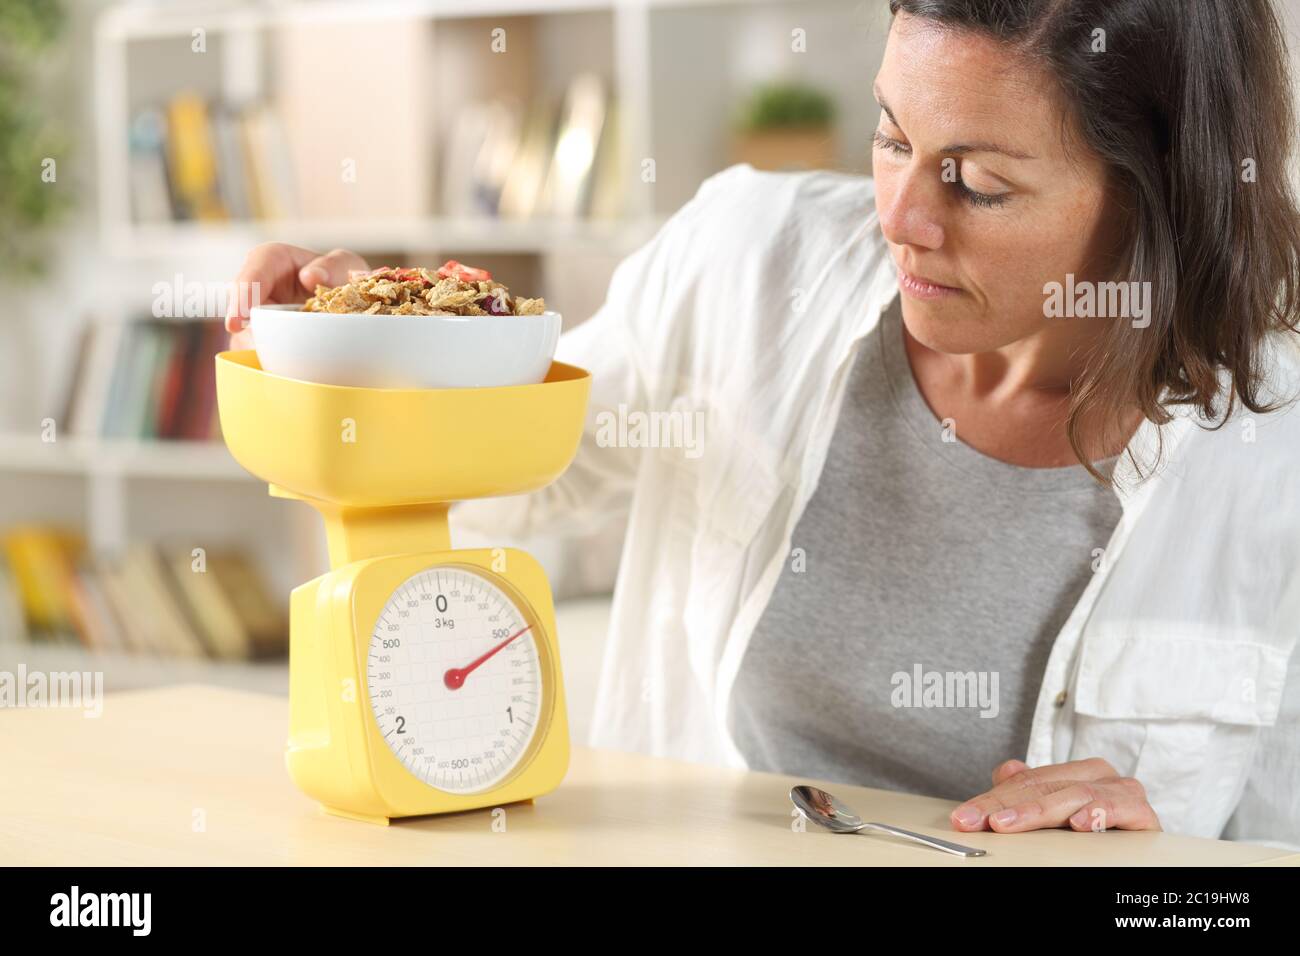 Yellow Small Weight scale stock photo. Image of kitchen - 116502930